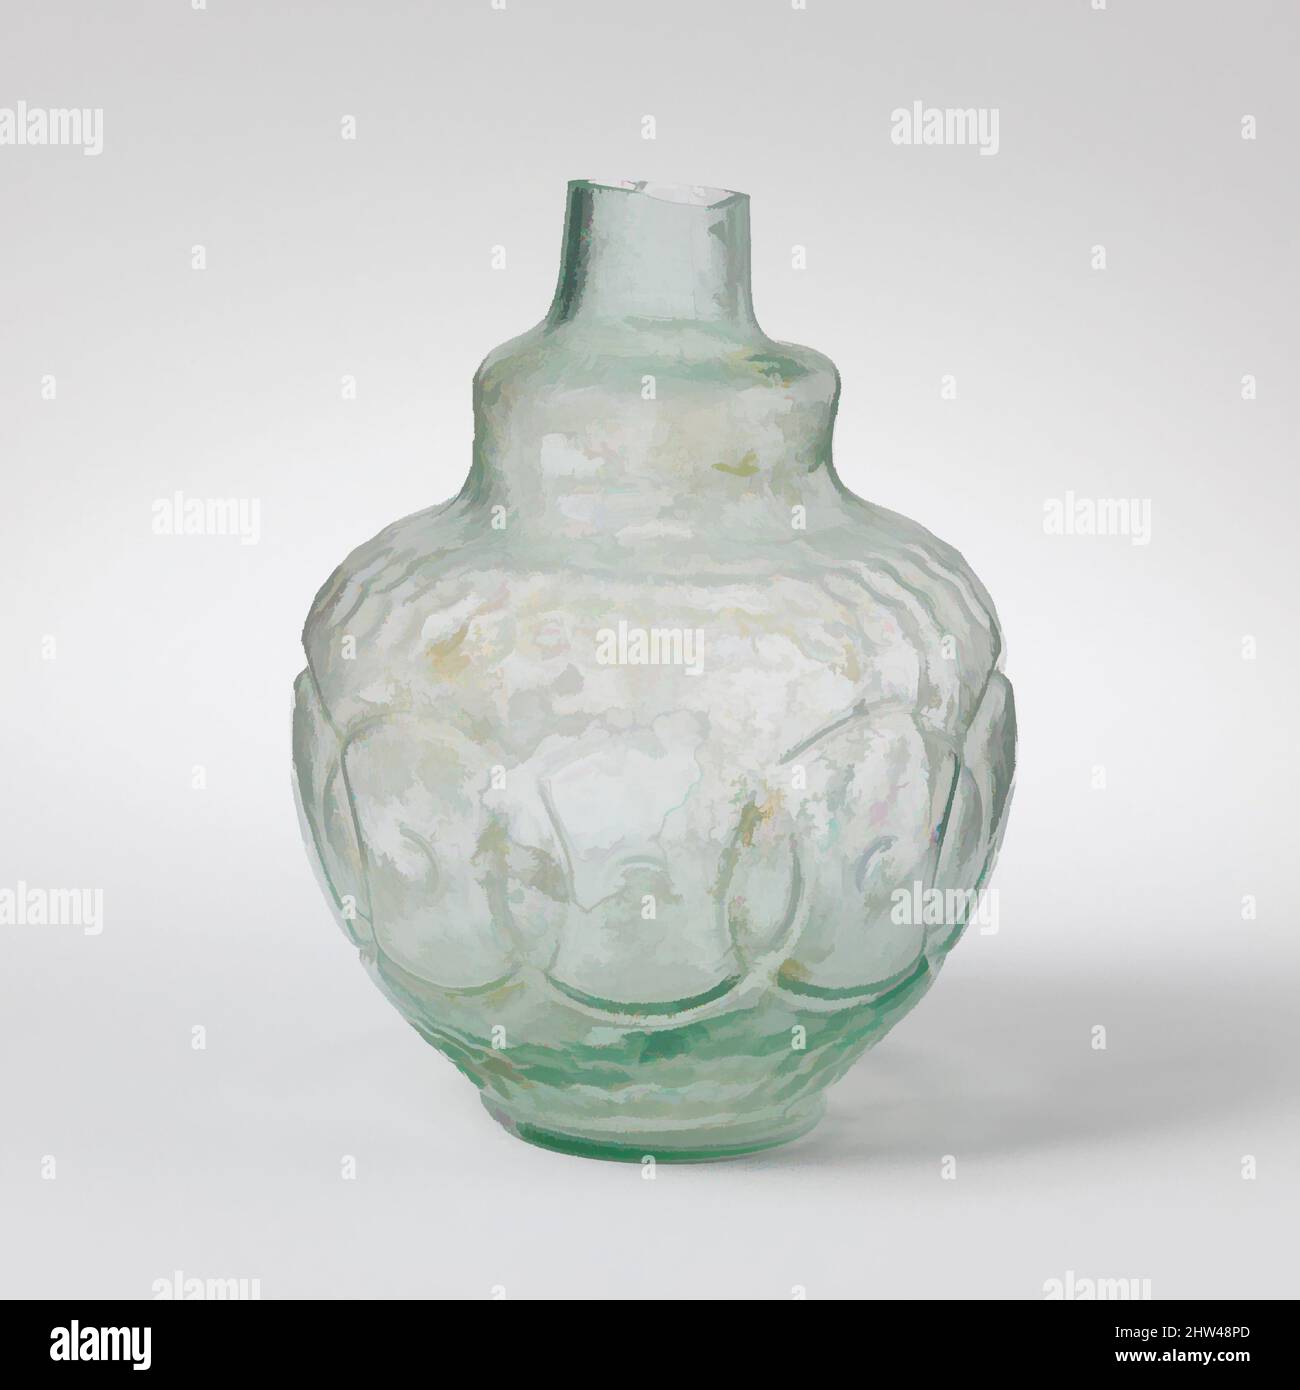 Art inspired by Glass flask decorated with intersecting circles, Imperial, 2nd–3rd century A.D., Roman, Glass; blown in a four-part mold, H.: 4 5/16 in. (11 cm), Glass, Translucent blue green., Unworked, knocked-off rim; short cylindrical neck, expanding downwards; sloping shoulder, Classic works modernized by Artotop with a splash of modernity. Shapes, color and value, eye-catching visual impact on art. Emotions through freedom of artworks in a contemporary way. A timeless message pursuing a wildly creative new direction. Artists turning to the digital medium and creating the Artotop NFT Stock Photo